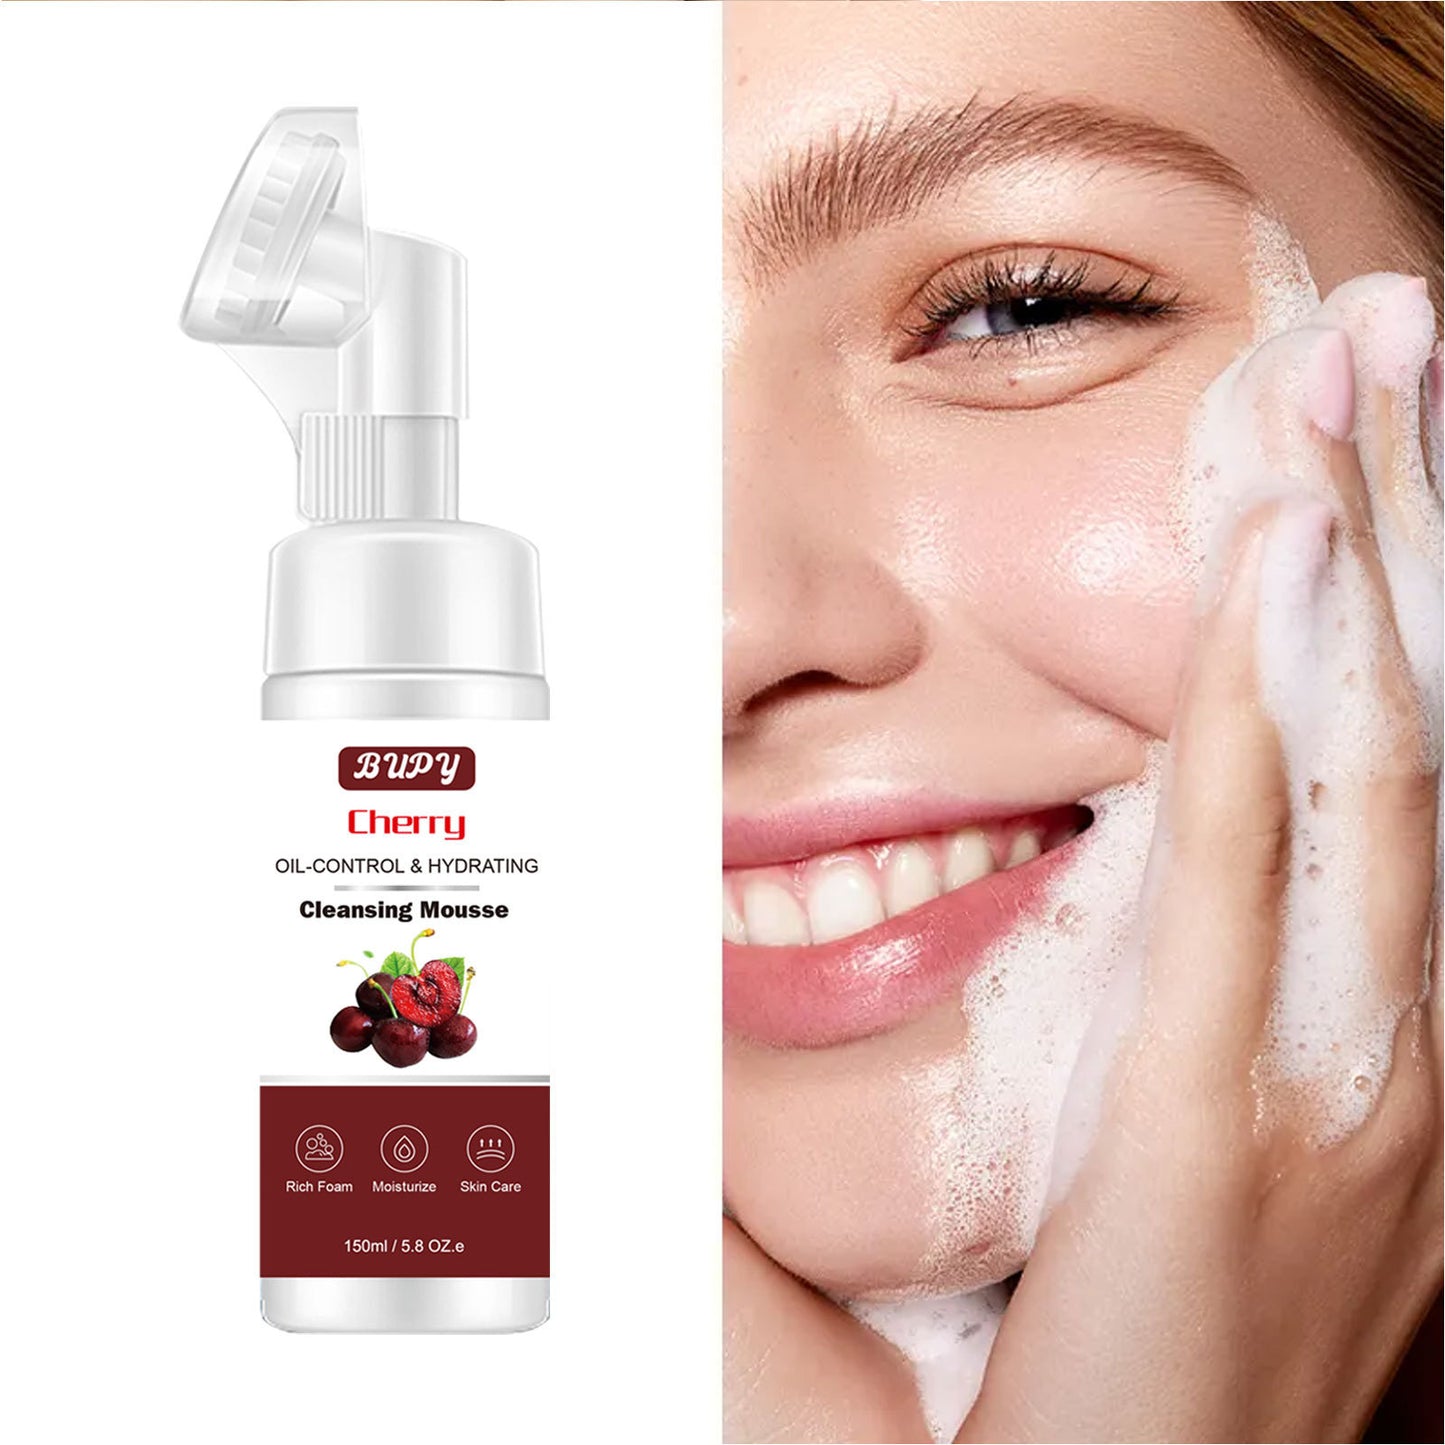 Wholesale Chelizi Cleansing Mousse, Sensitive Skin, Men and Women, Deep Cleansing Facial Cleanser 326